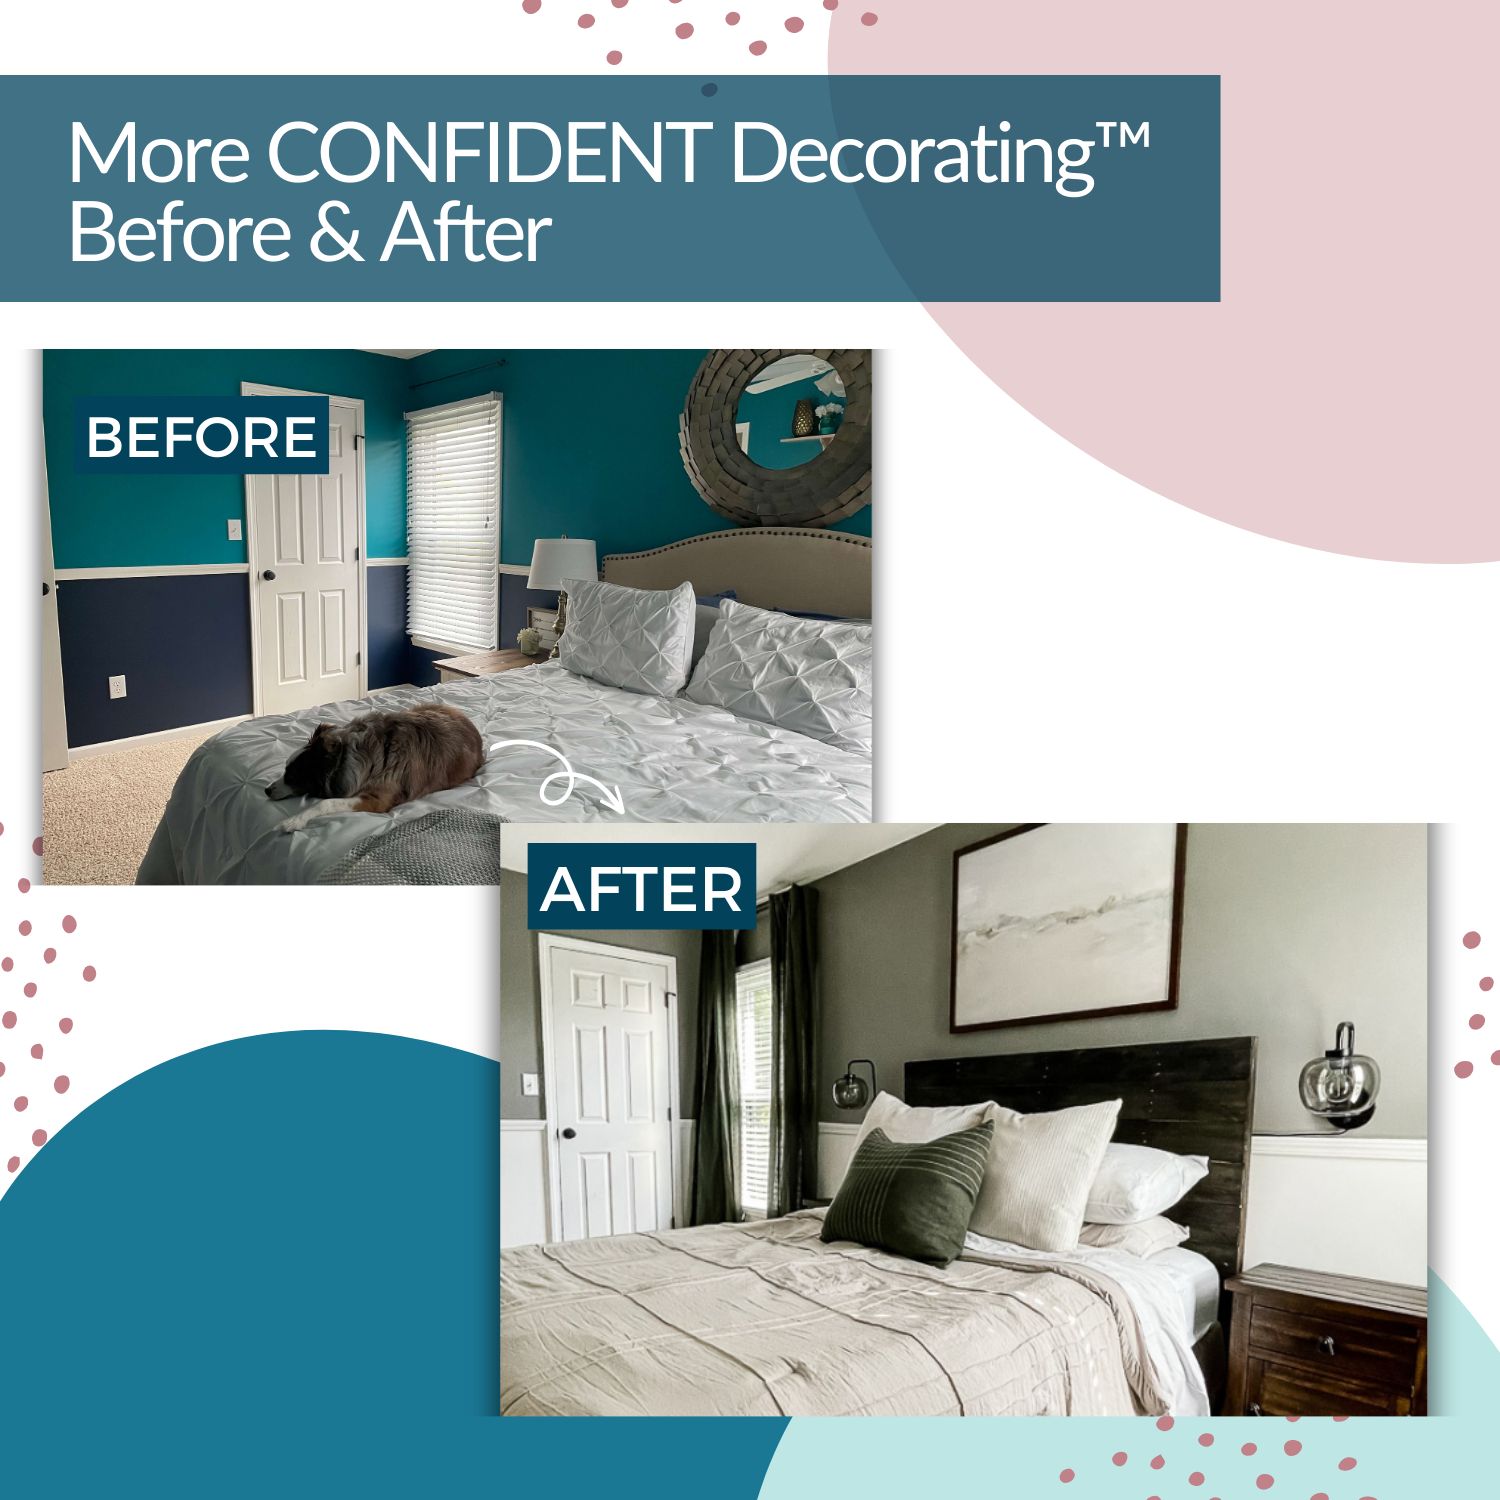 Discover the transformation with our room makeover: before, teal walls and a pet on the bed; after, sleek gray walls, a wood-accented headboard, crisp white bedding with green pillows, and abstract wall art. Our Confident Decorating™ Self-Study by My Homier Home made this stylish upgrade effortless.